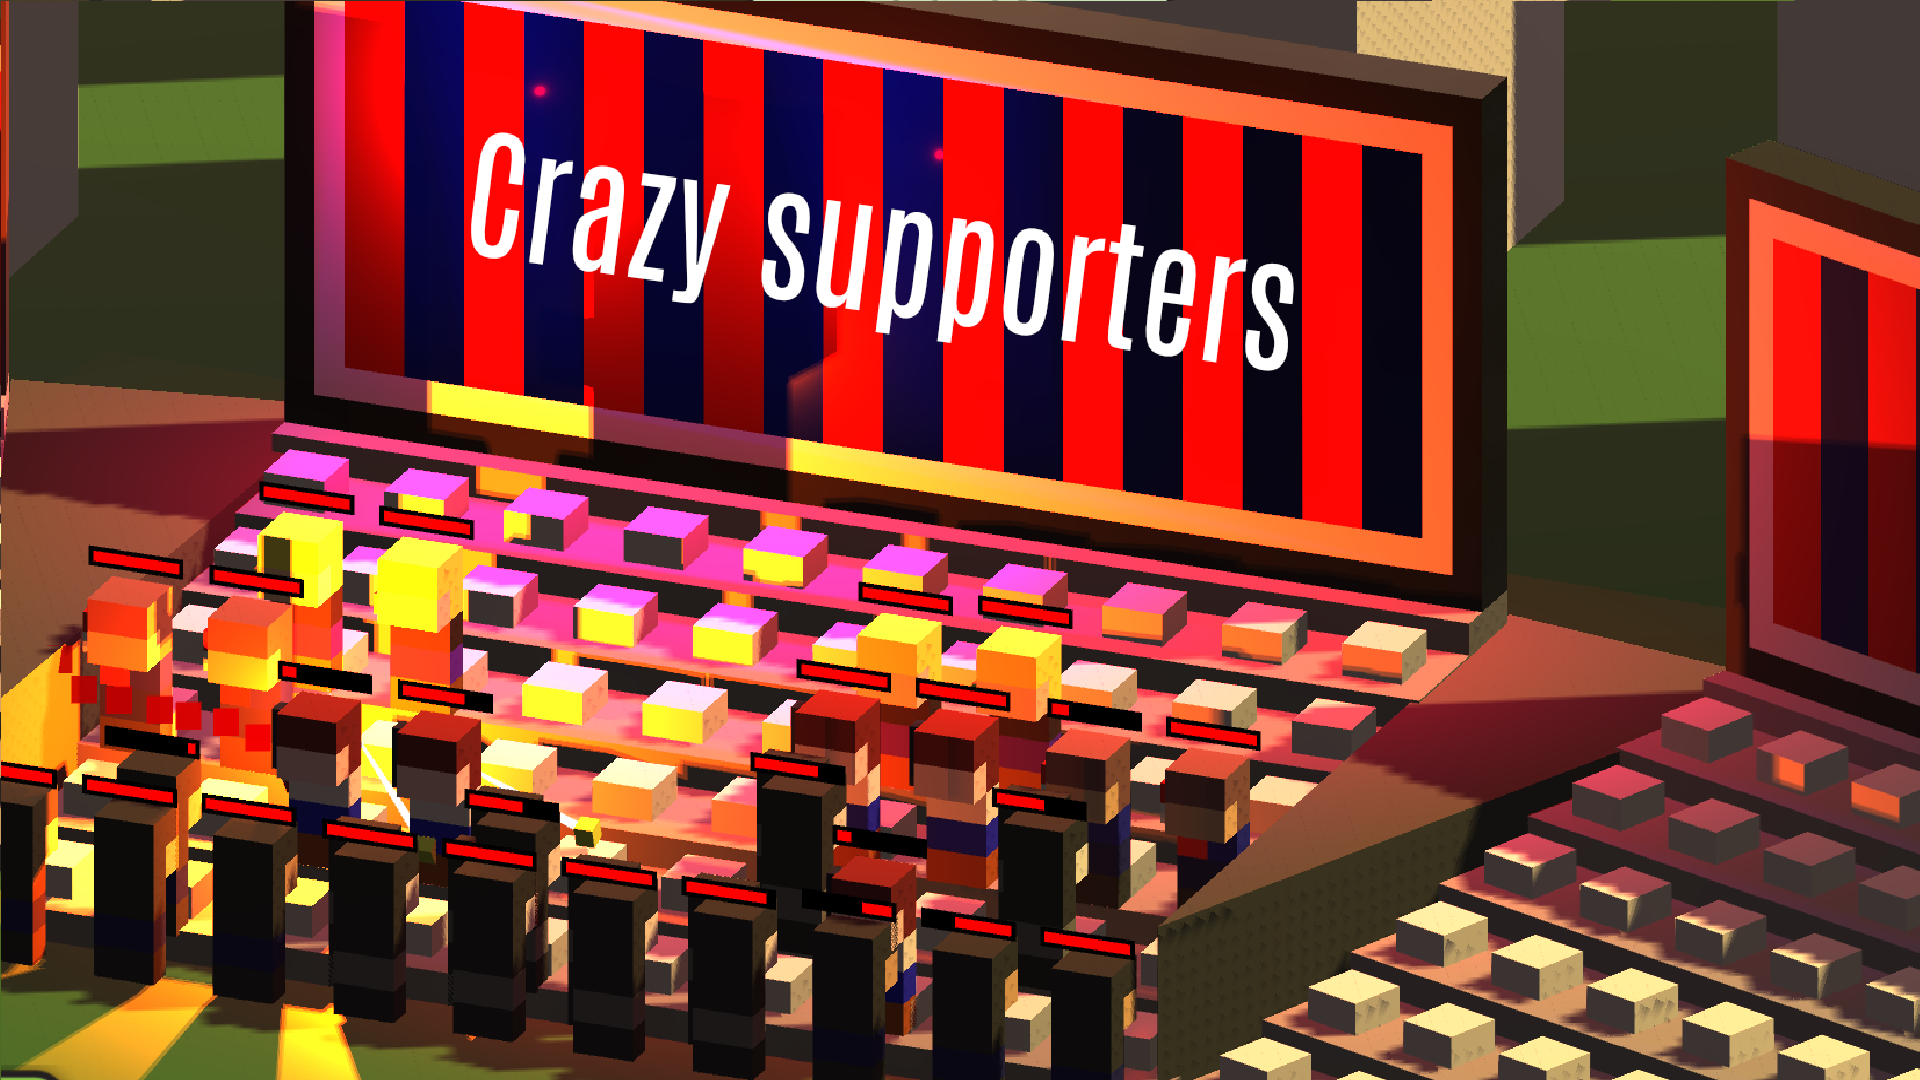 Crazy Supporters